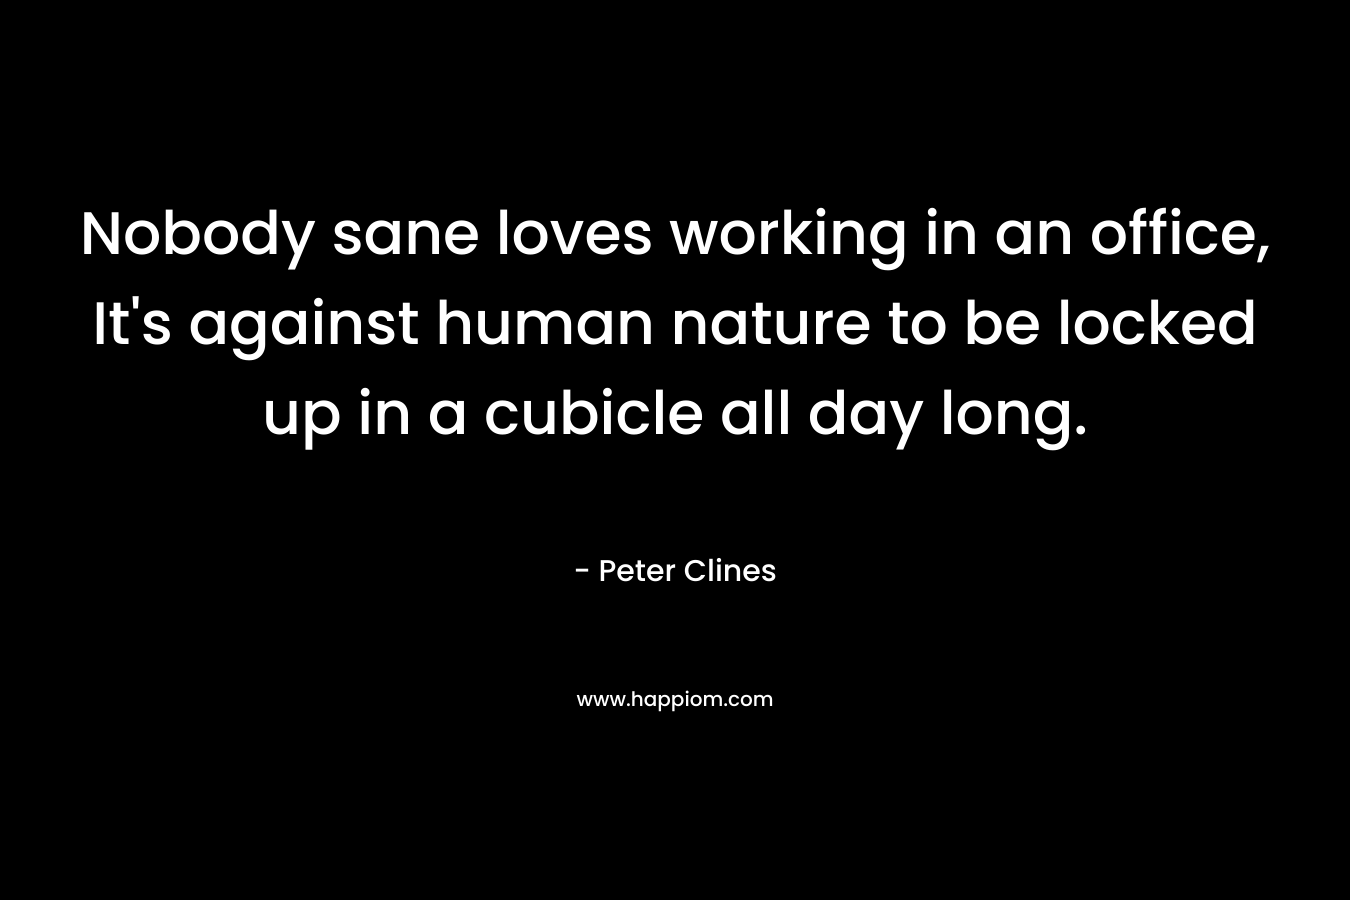 Nobody sane loves working in an office, It’s against human nature to be locked up in a cubicle all day long. – Peter Clines